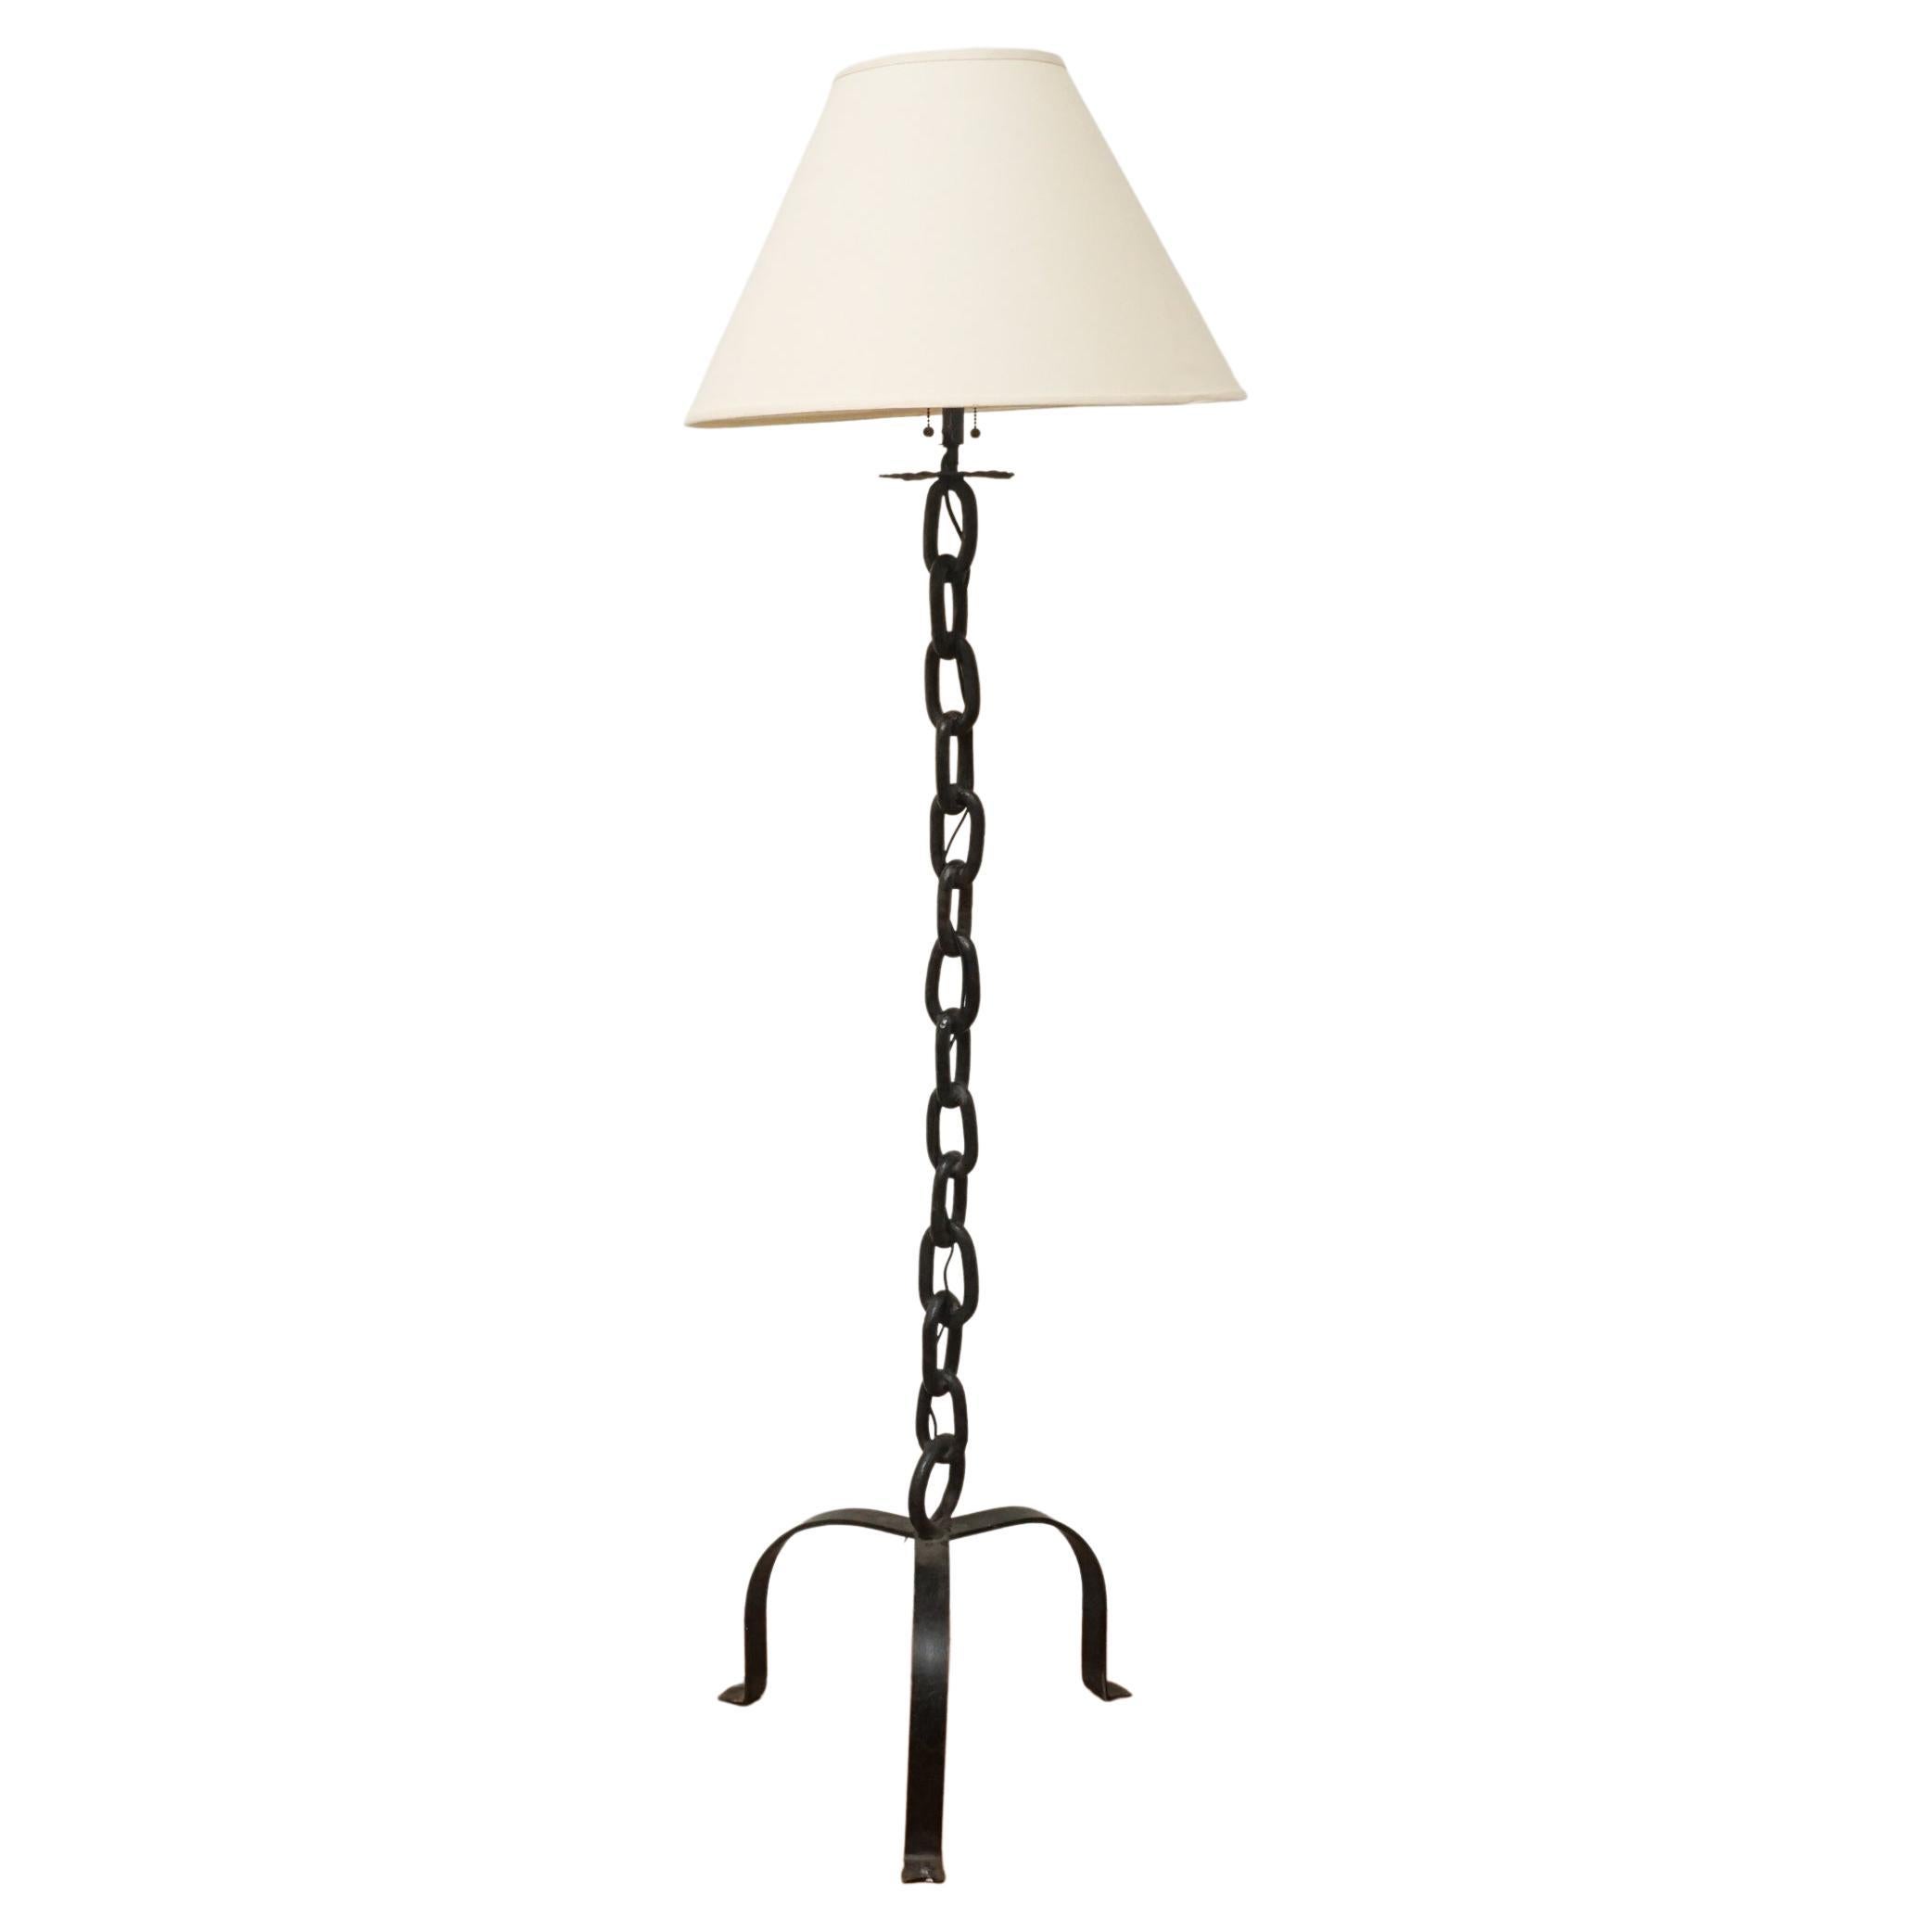 Vintage Chain Floor Lamp from the 1950's